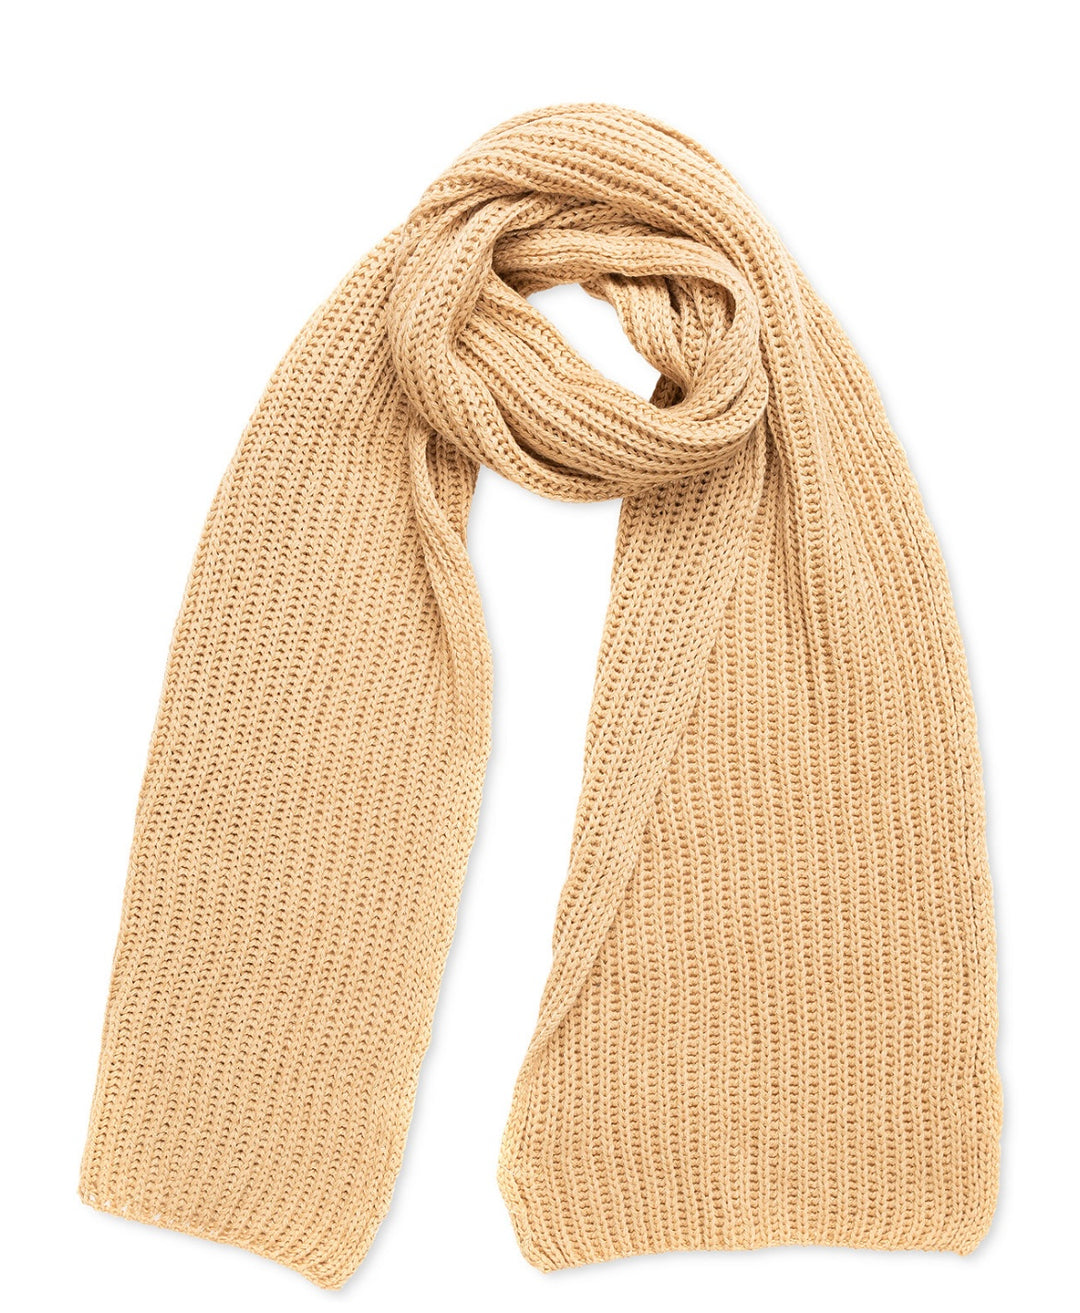 Style & Co. Women's Solid Ribbed Muffler Scarf